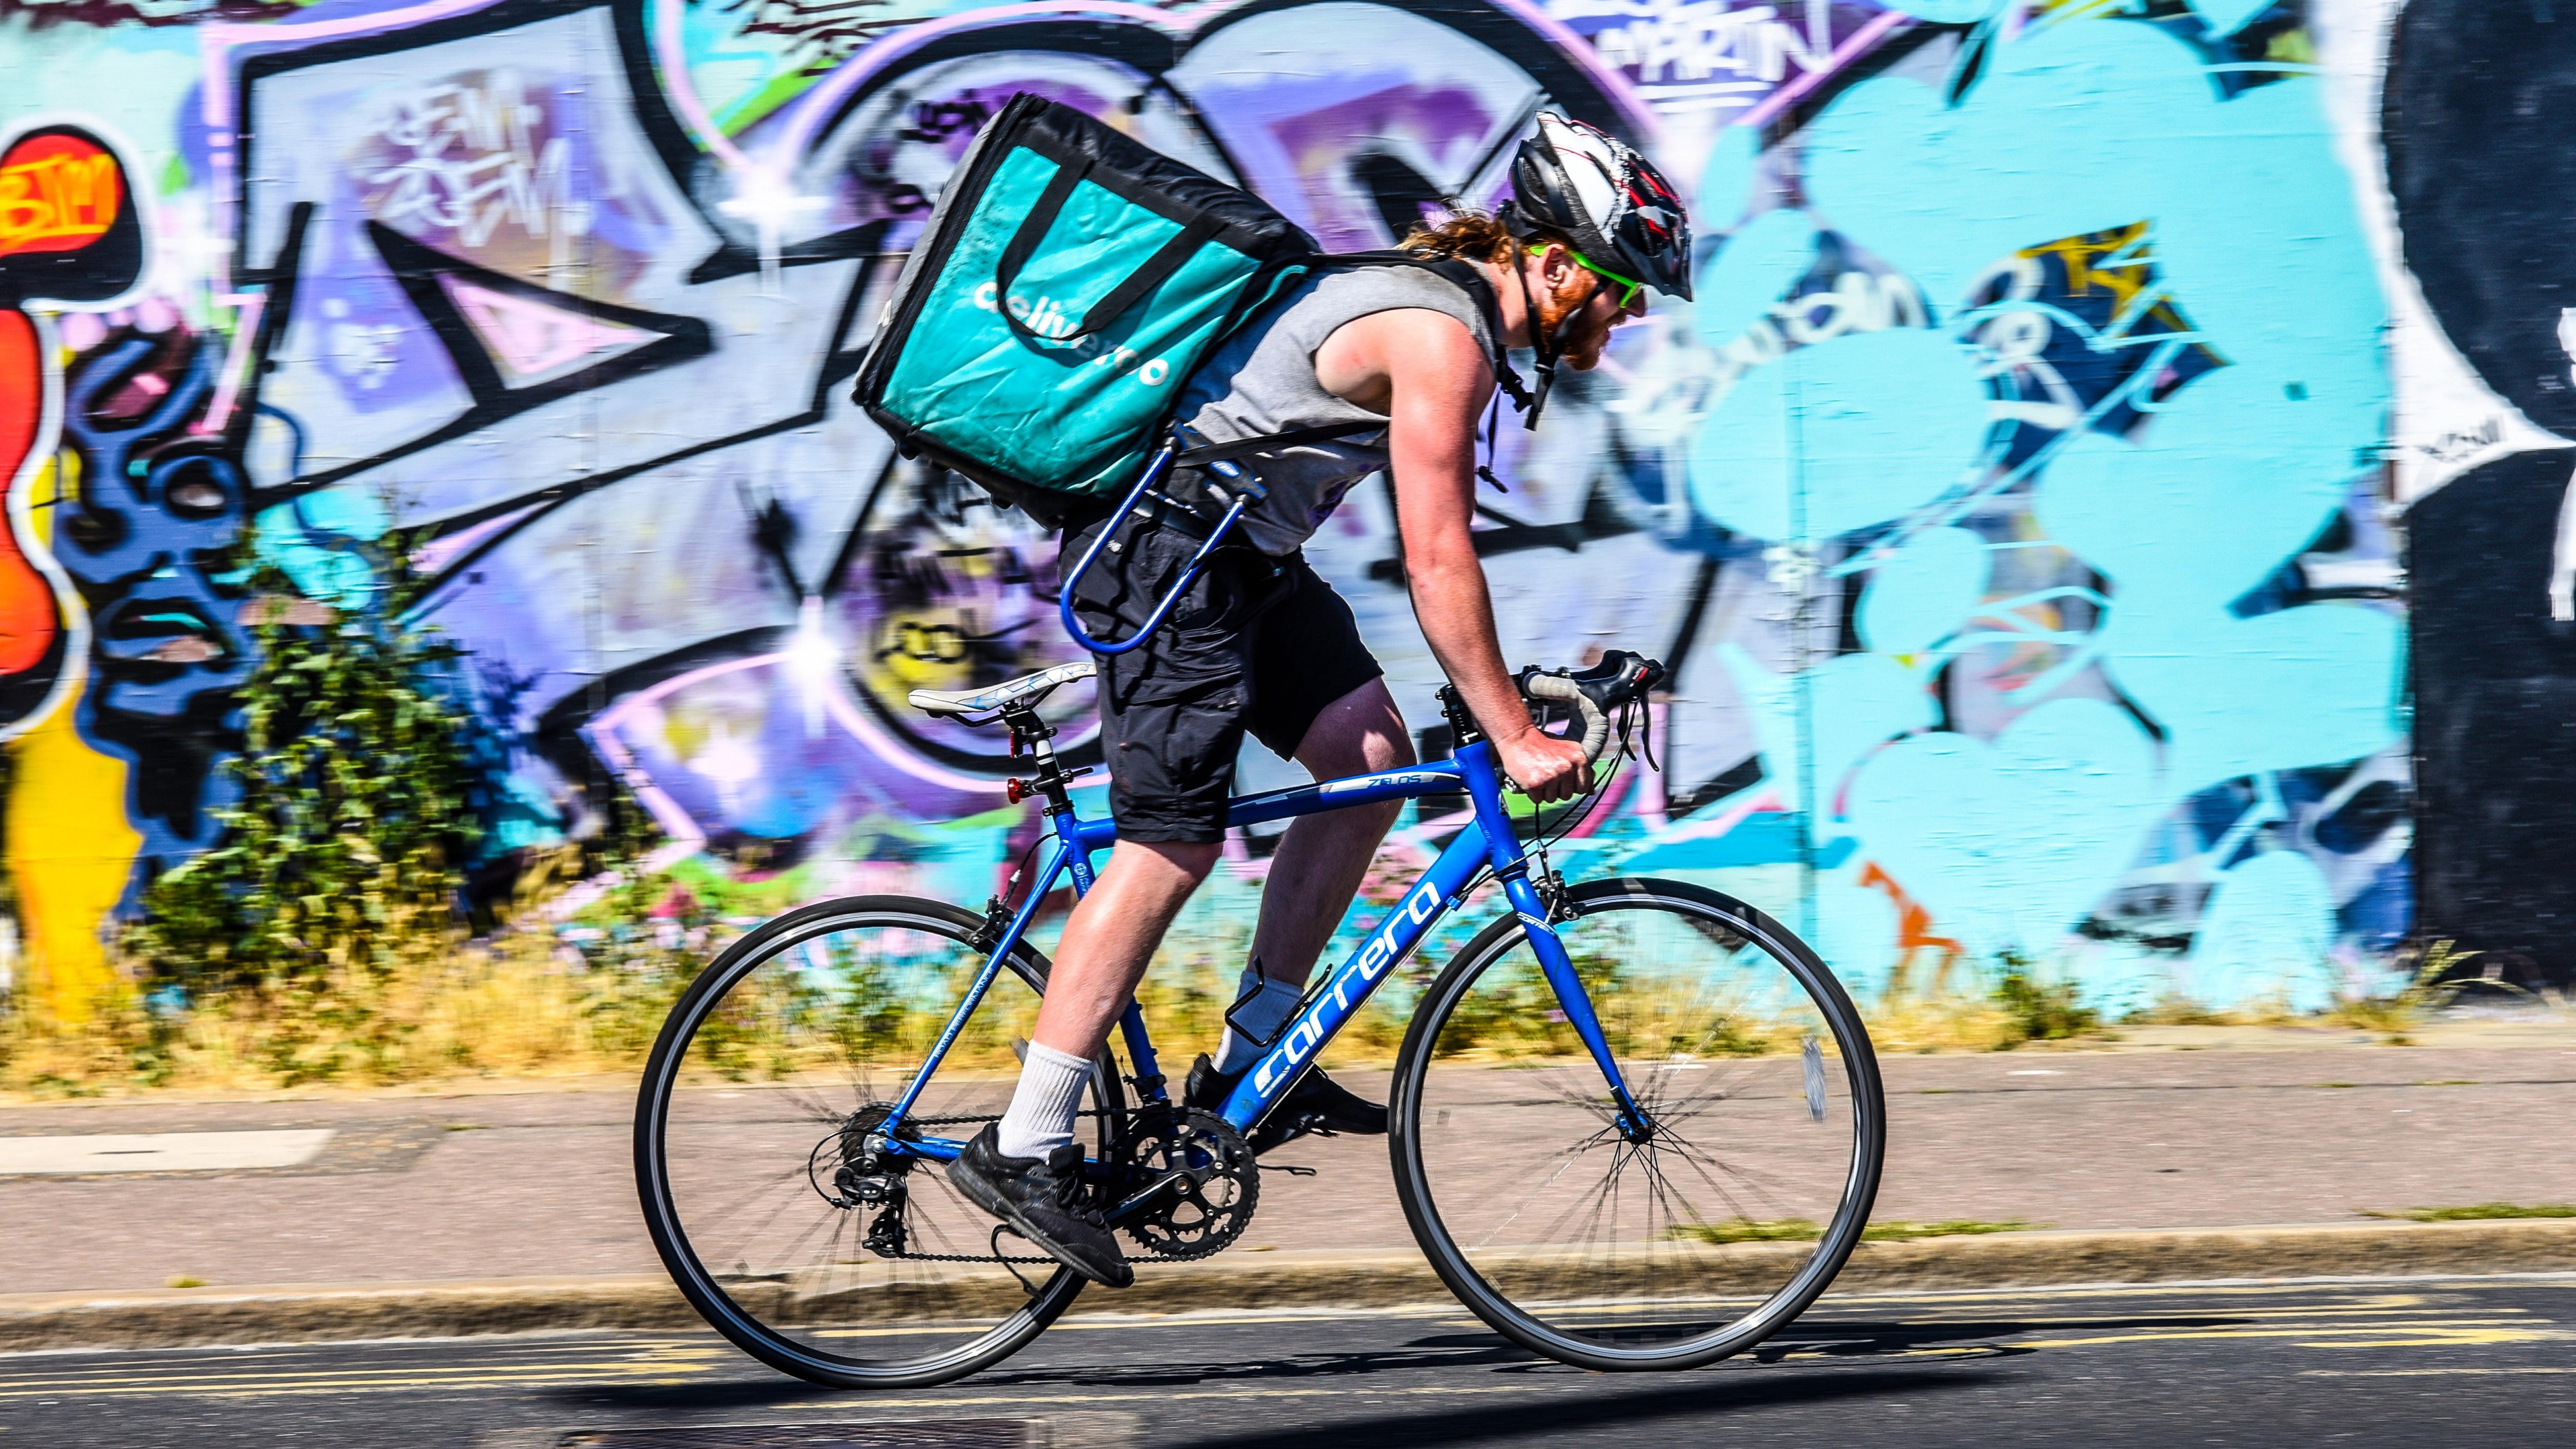 Deliveroo has been reducing the restaurant waiting times for riders by using predictive artificial intelligence, Giles Thorne said